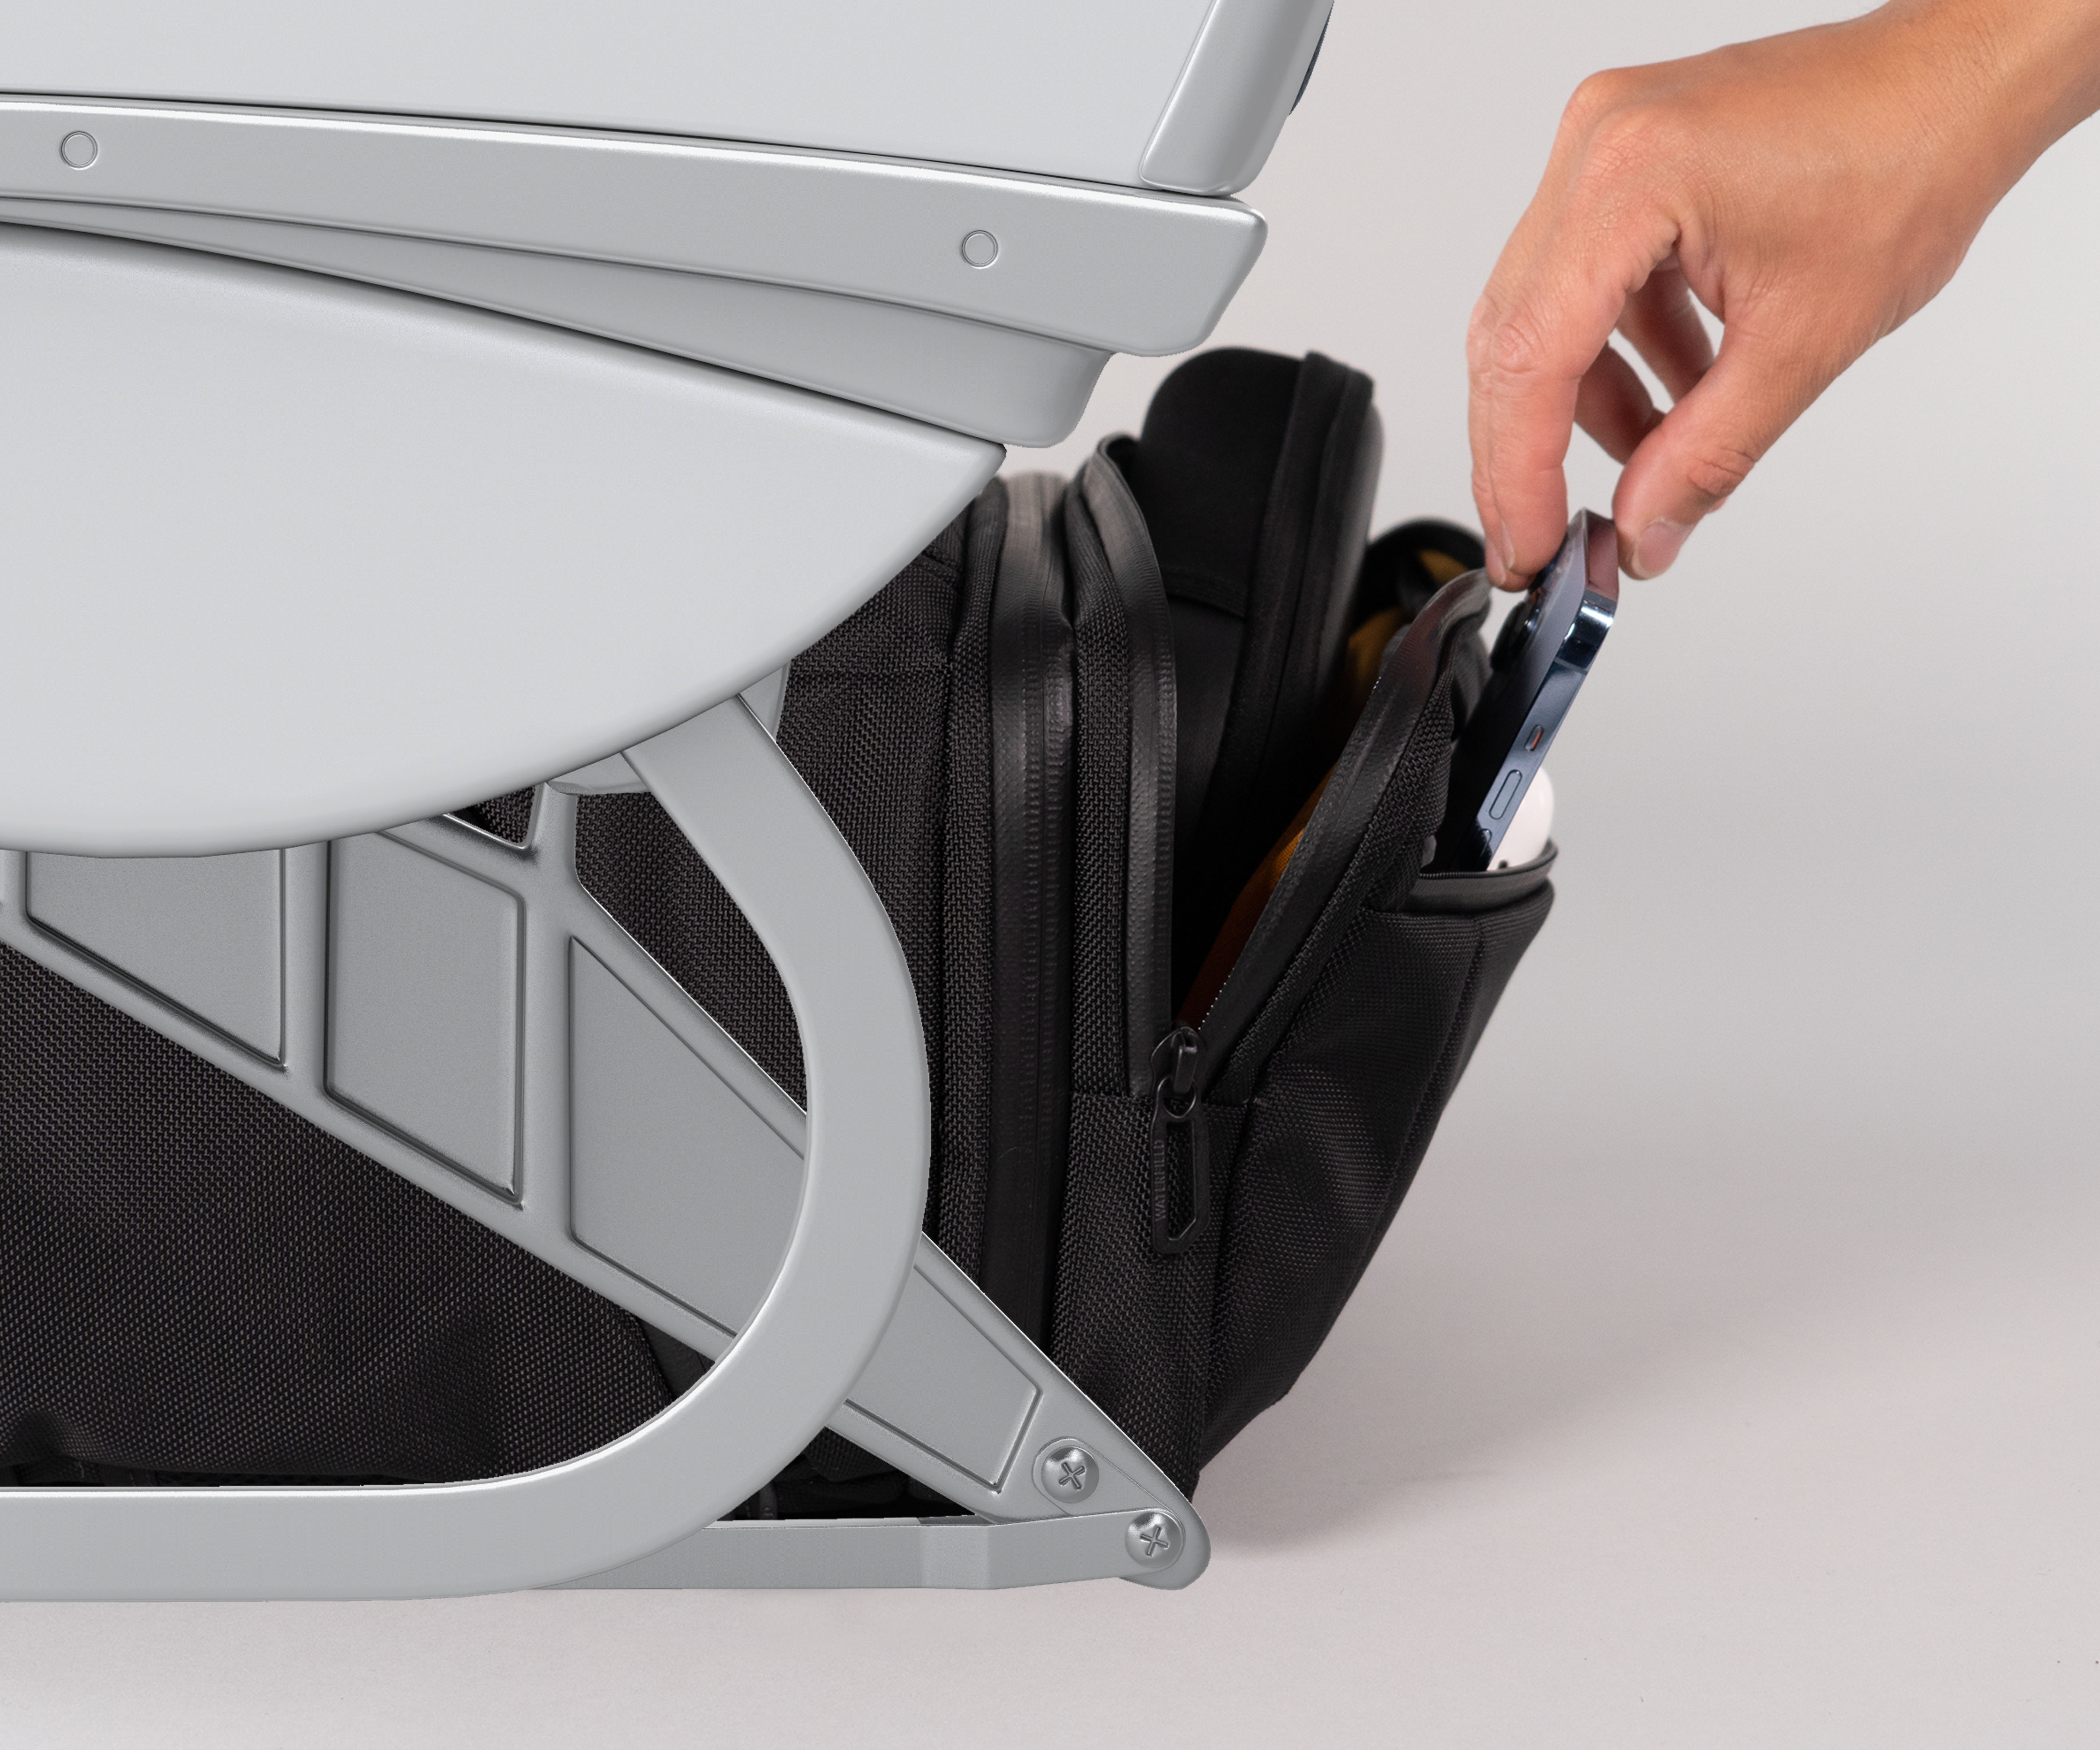 Easy access to top pockets when under an airline seat